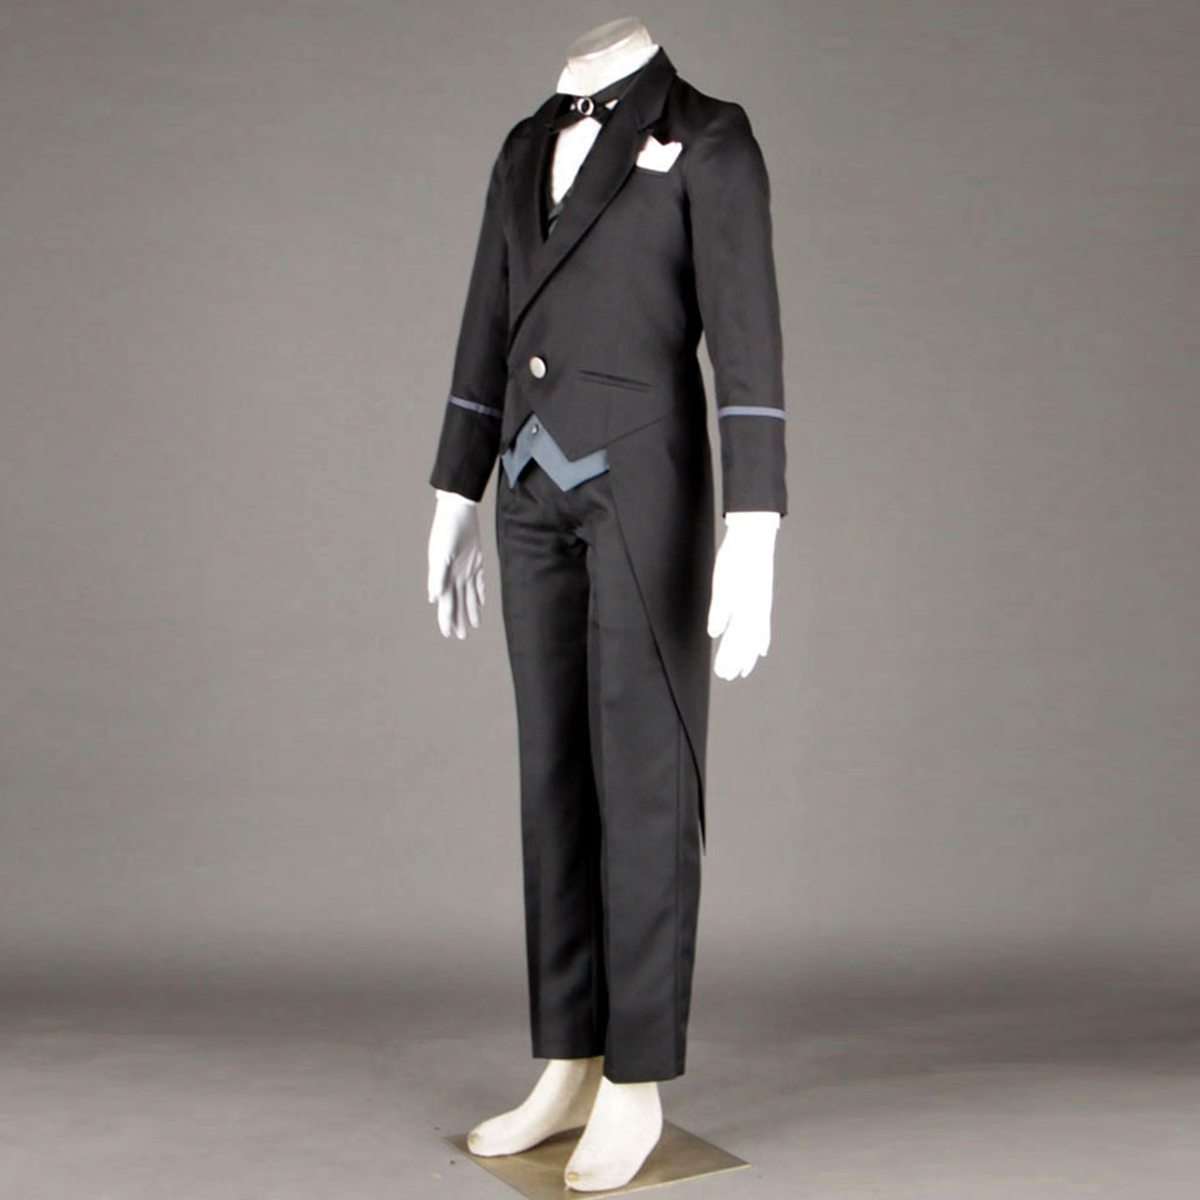 Black Butler Claude Faustus 1 Anime Cosplay Costumes Outfit